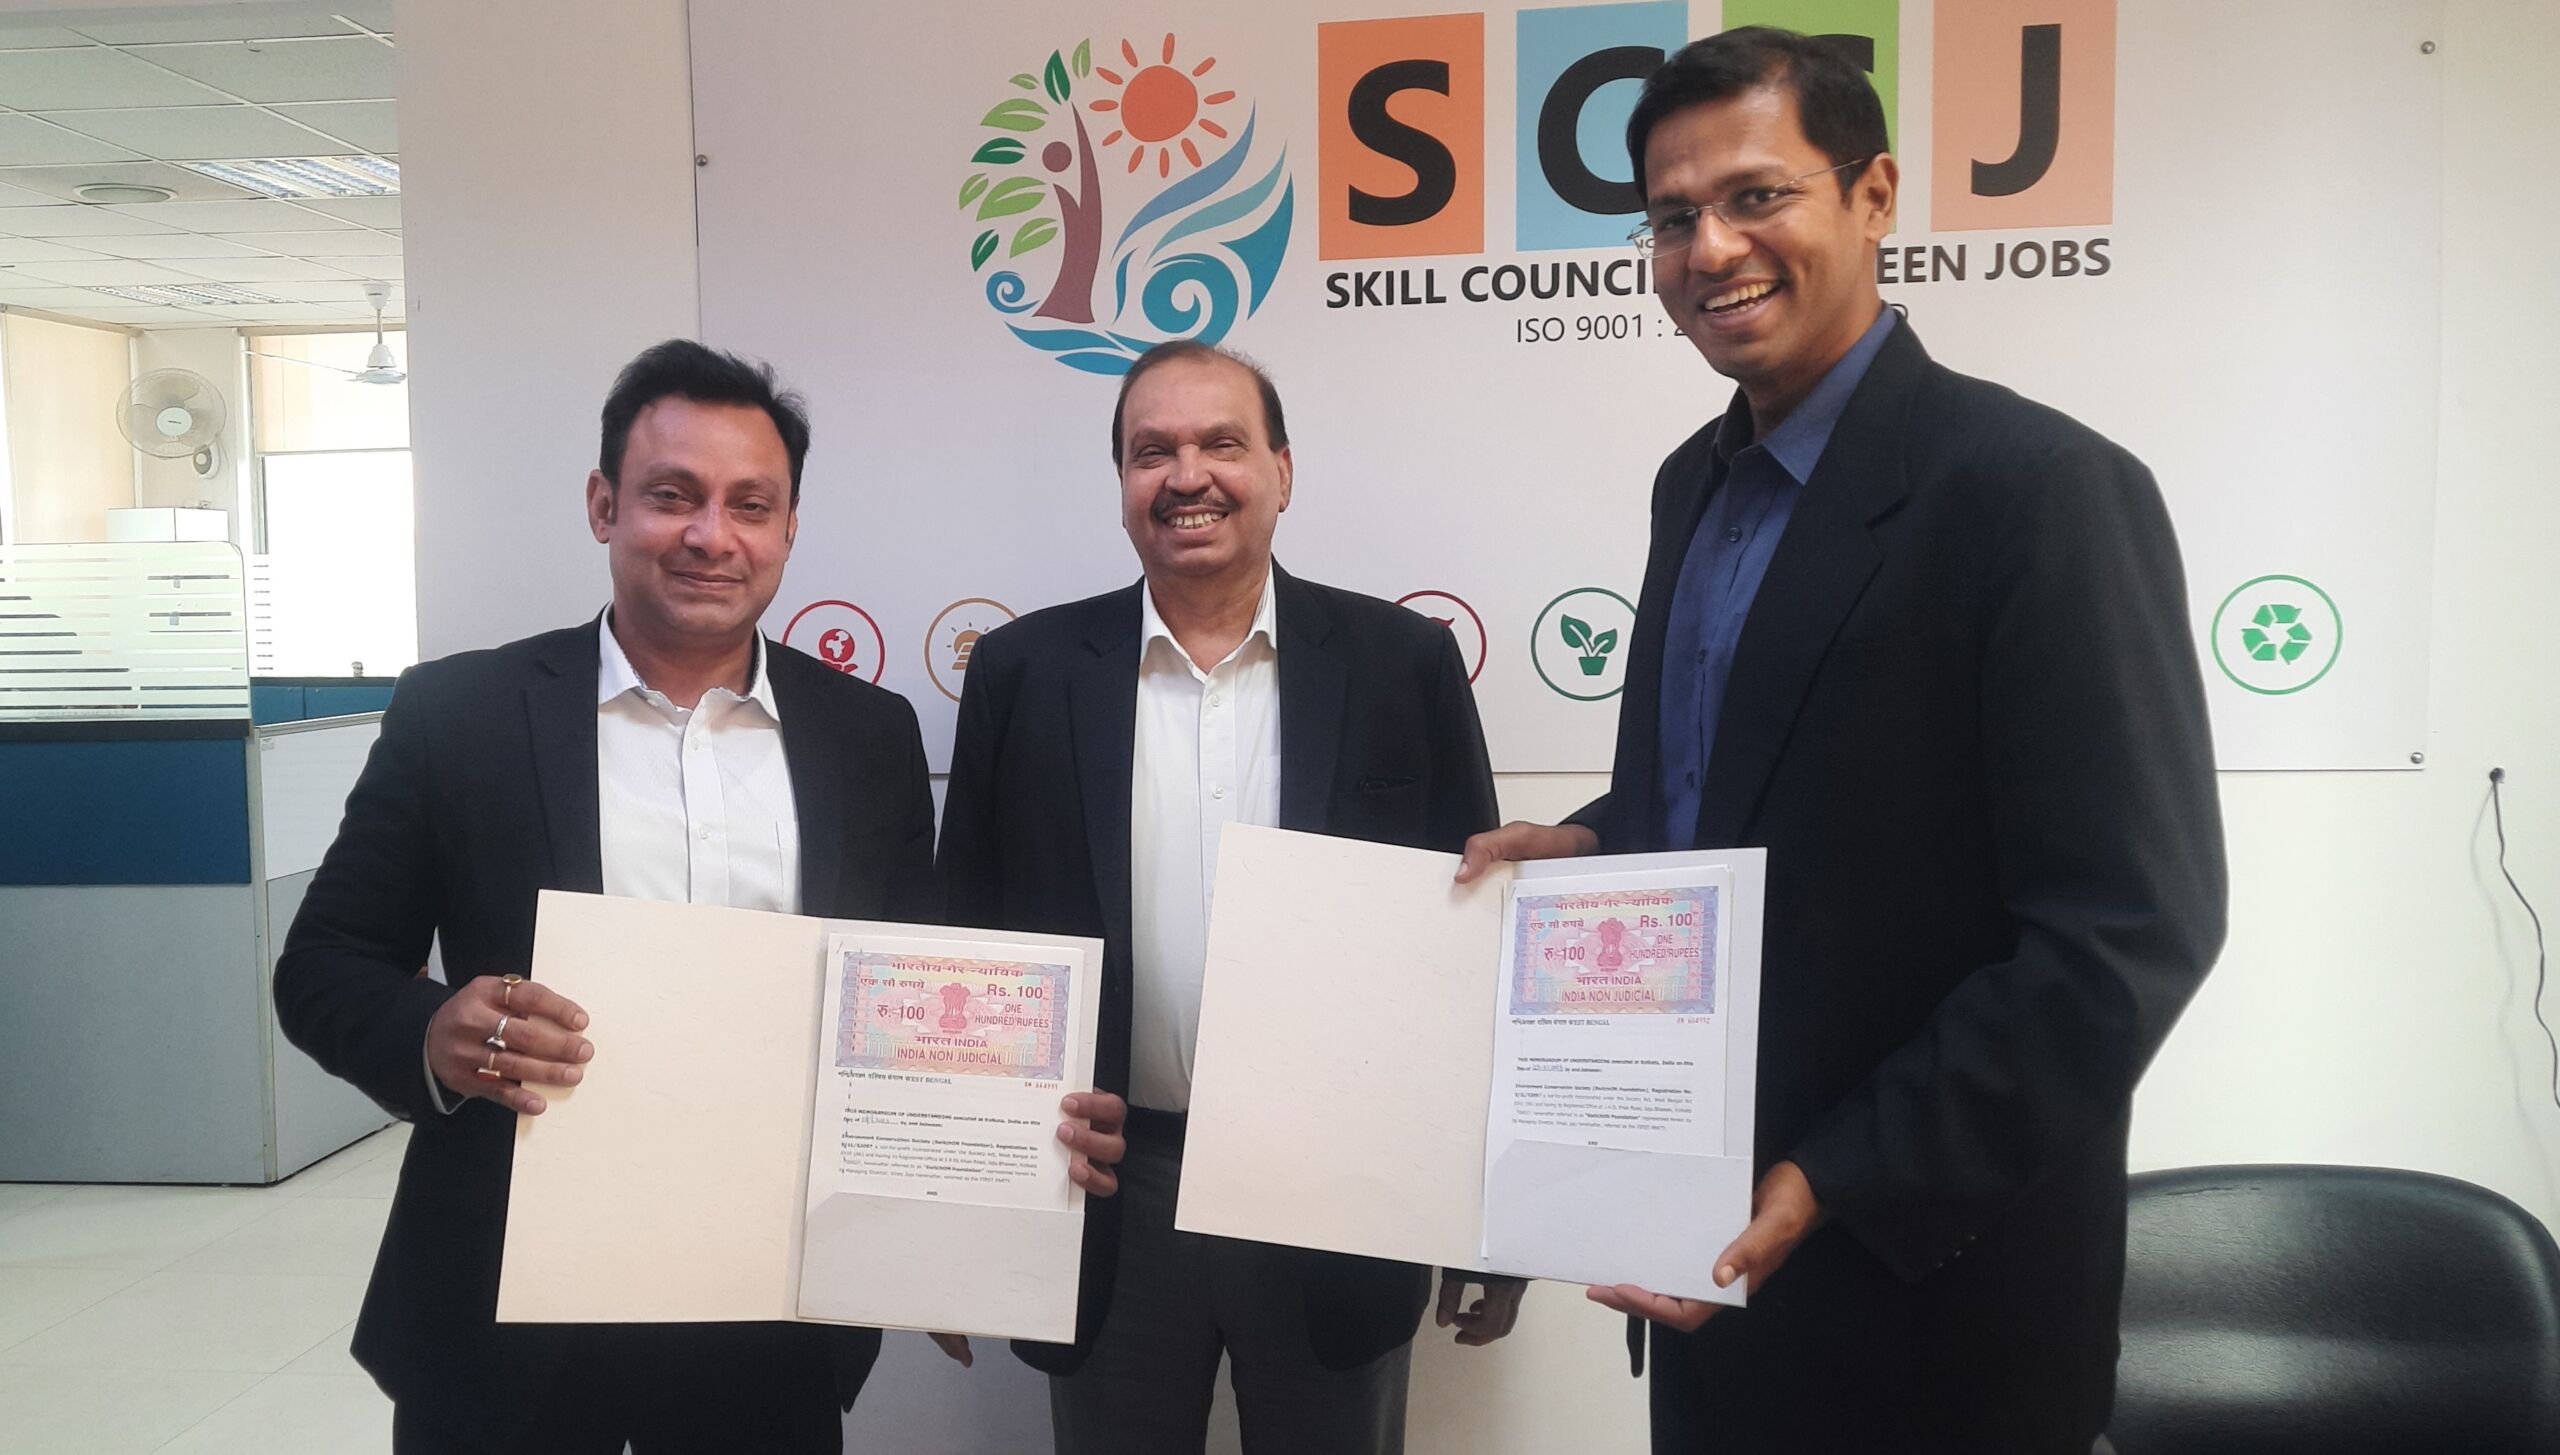 Skill Council for Green Jobs & SwitchON Foundation collaborate to promote Skills & Development